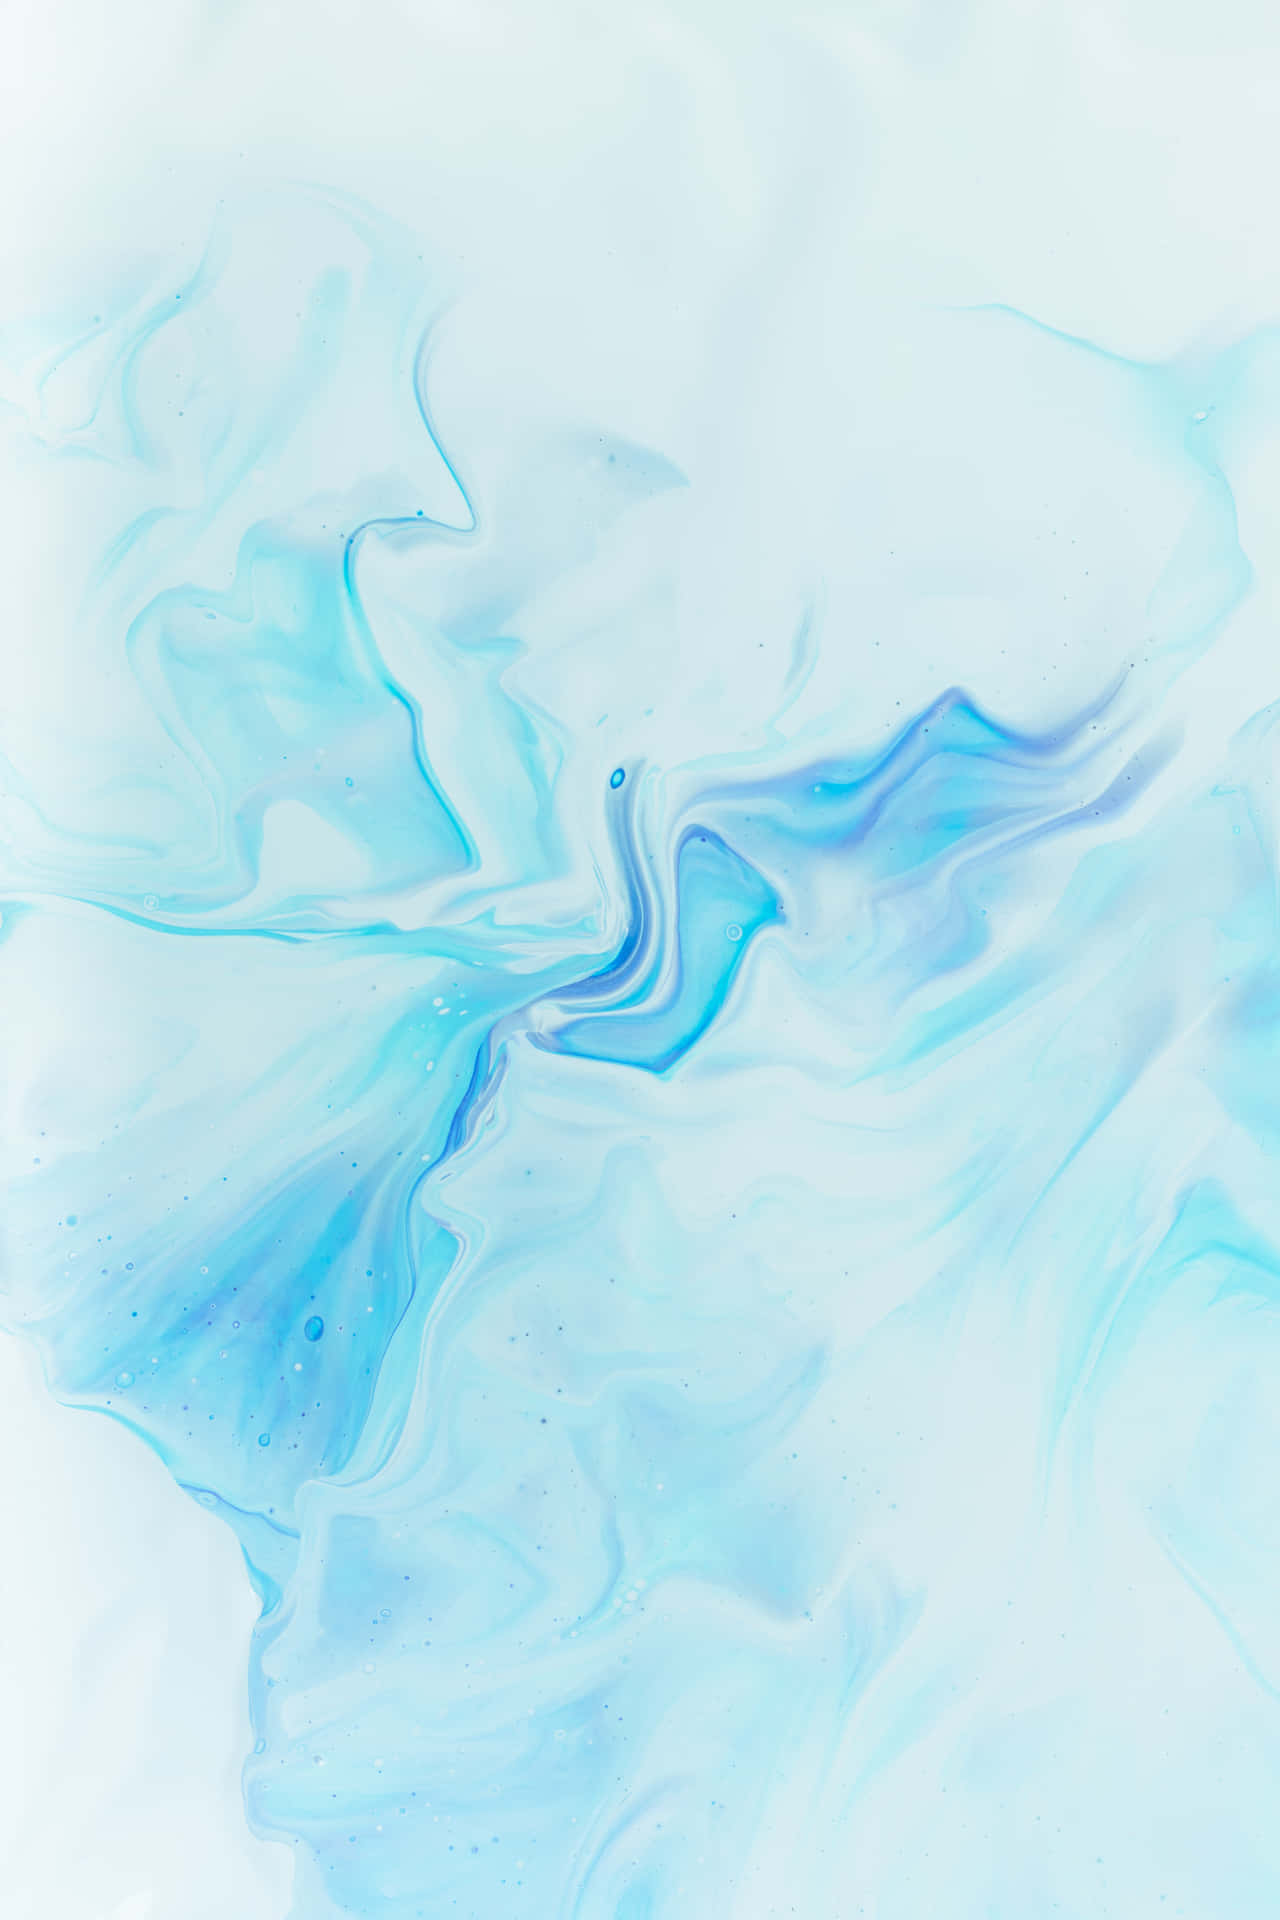 Abstract design of blue wave